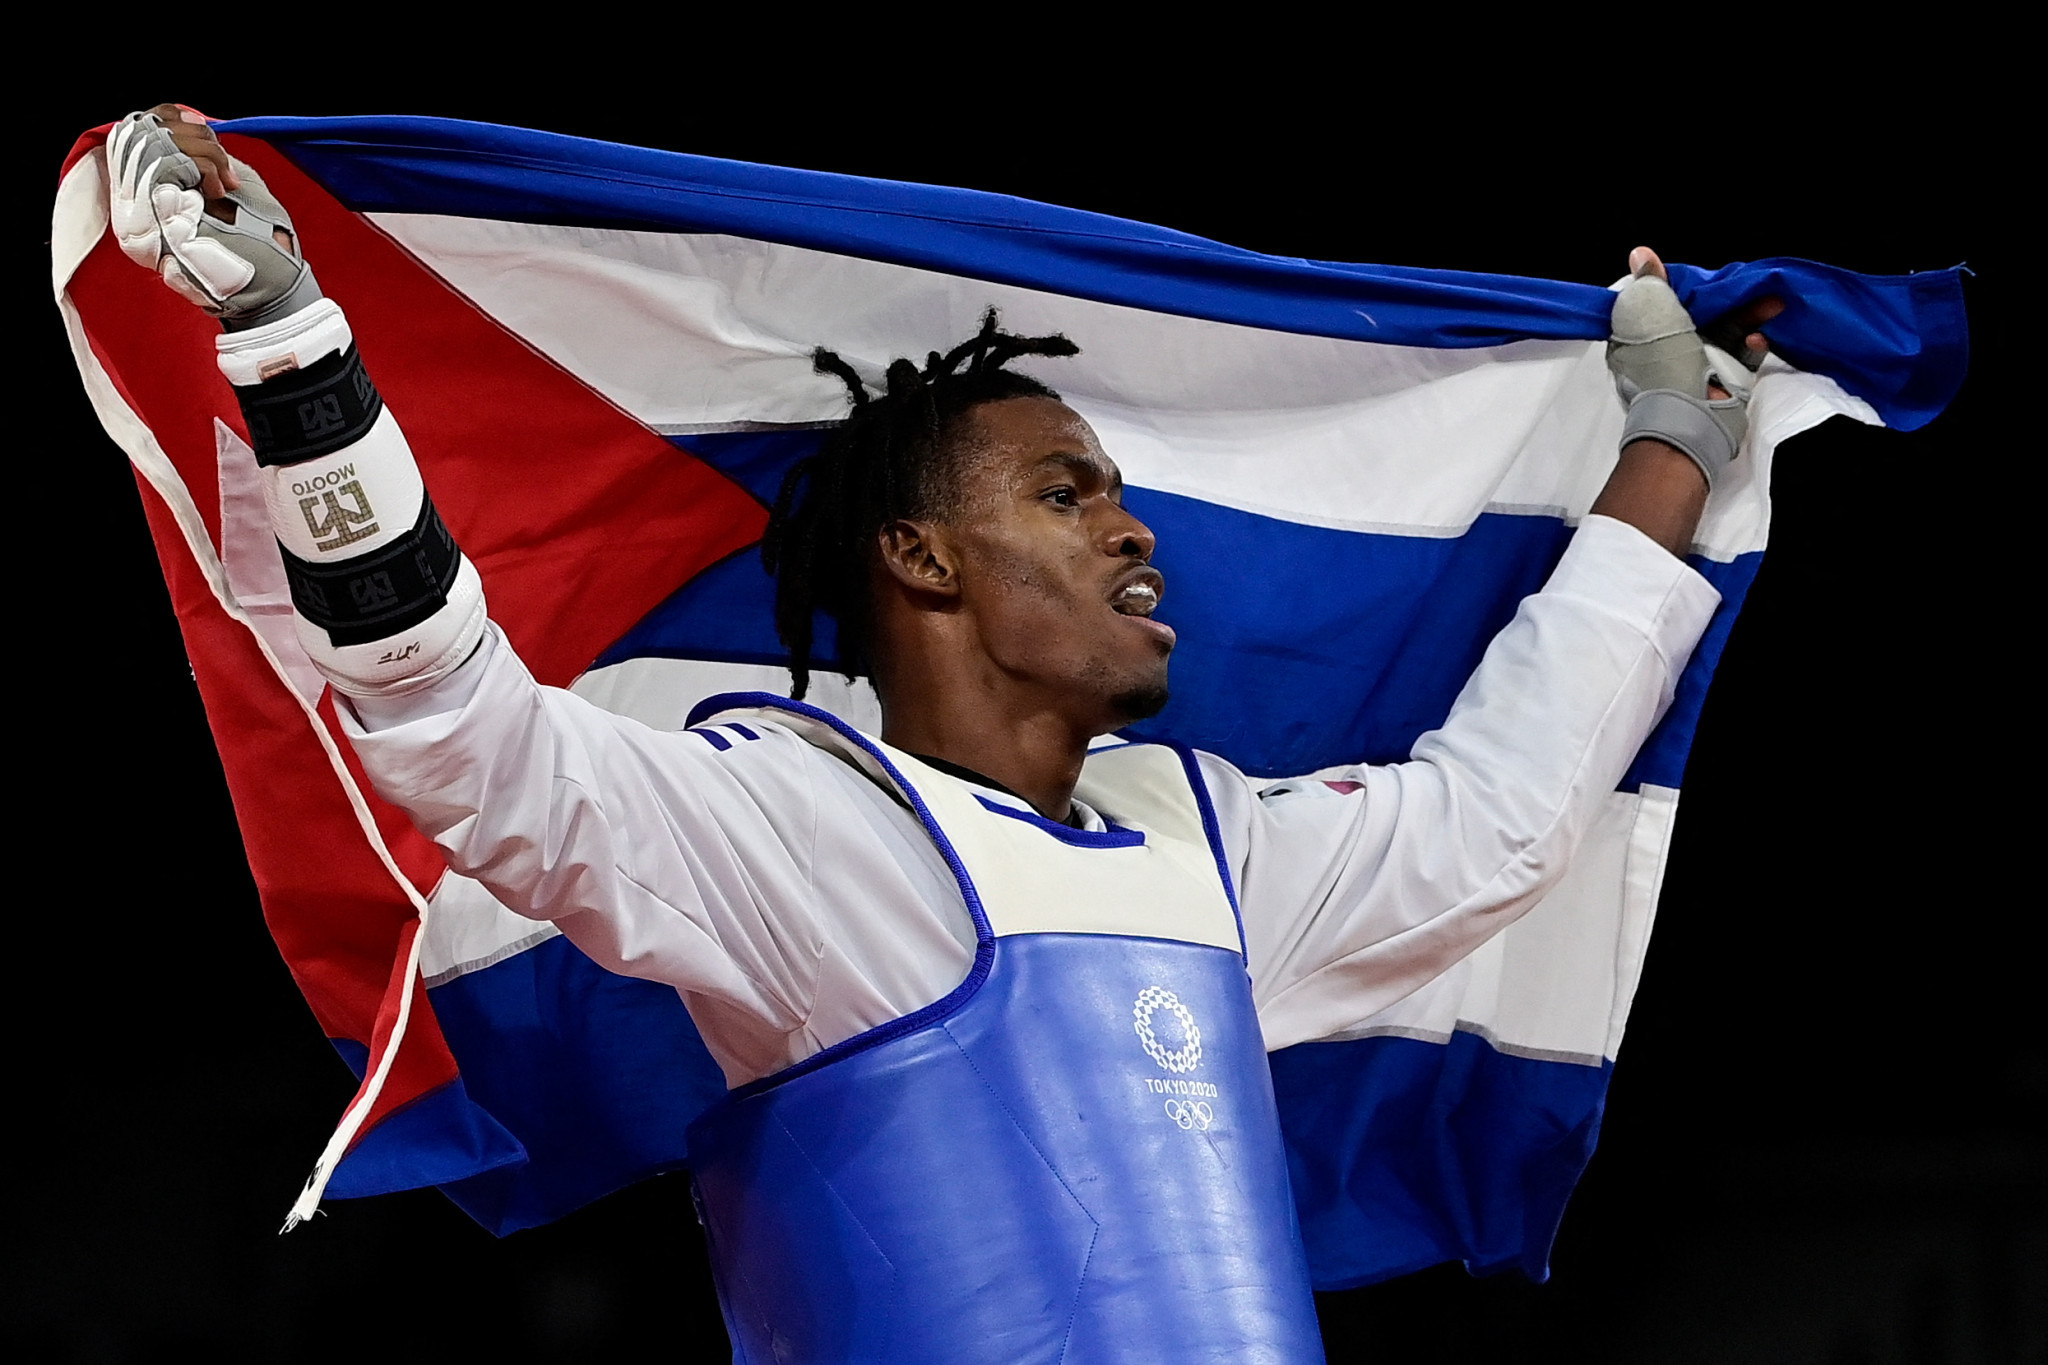 Rafael Alba recovered to win Olympic bronze at Tokyo 2020 ©Getty Images